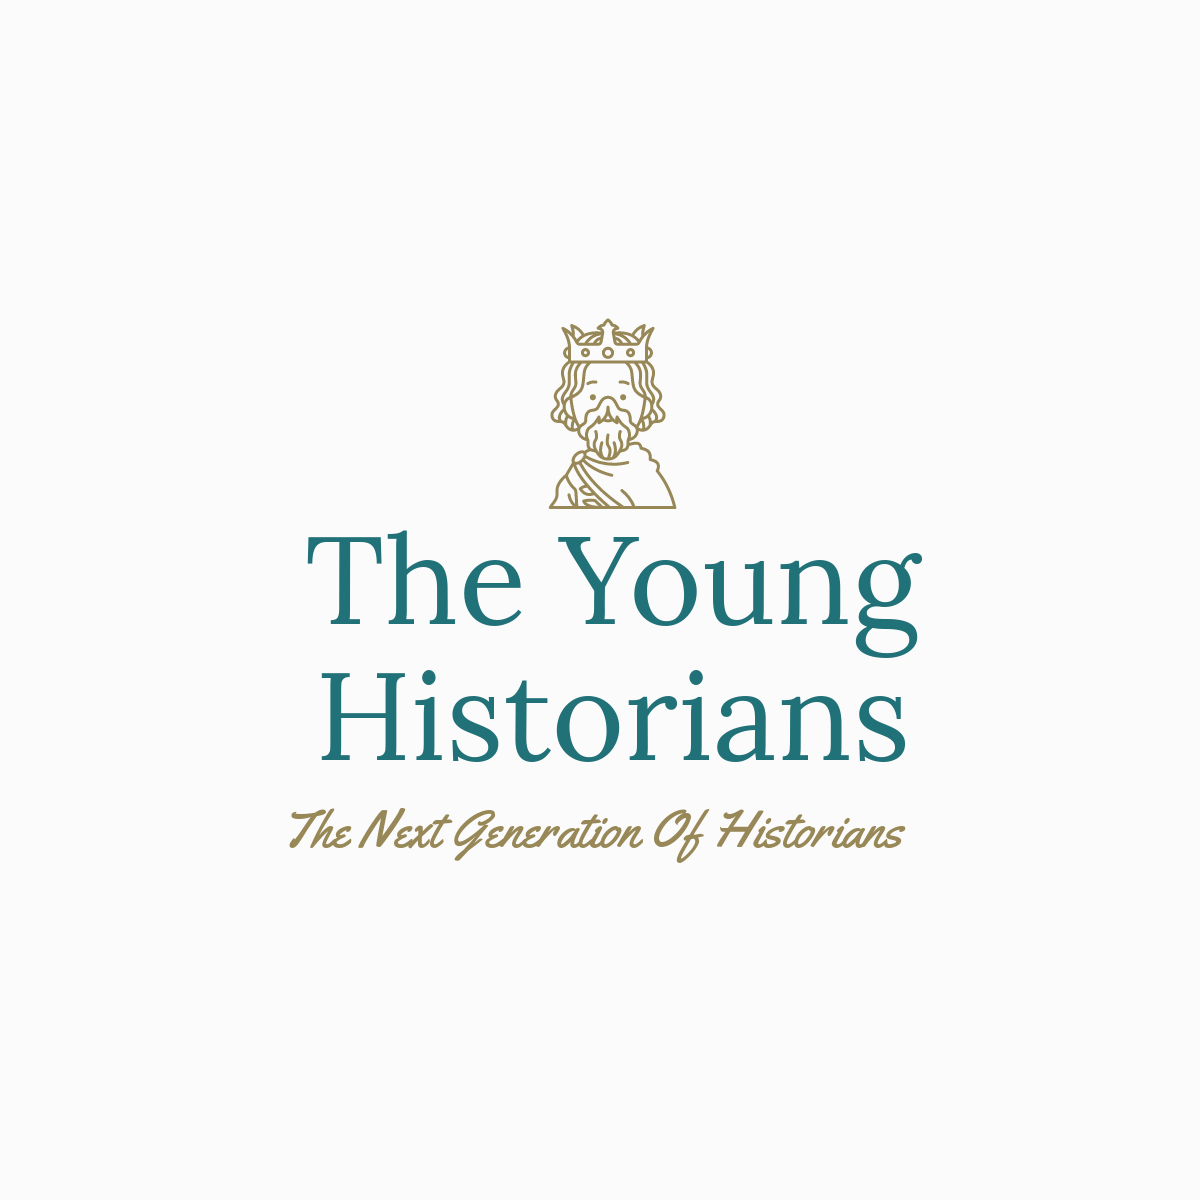 The Young Historians